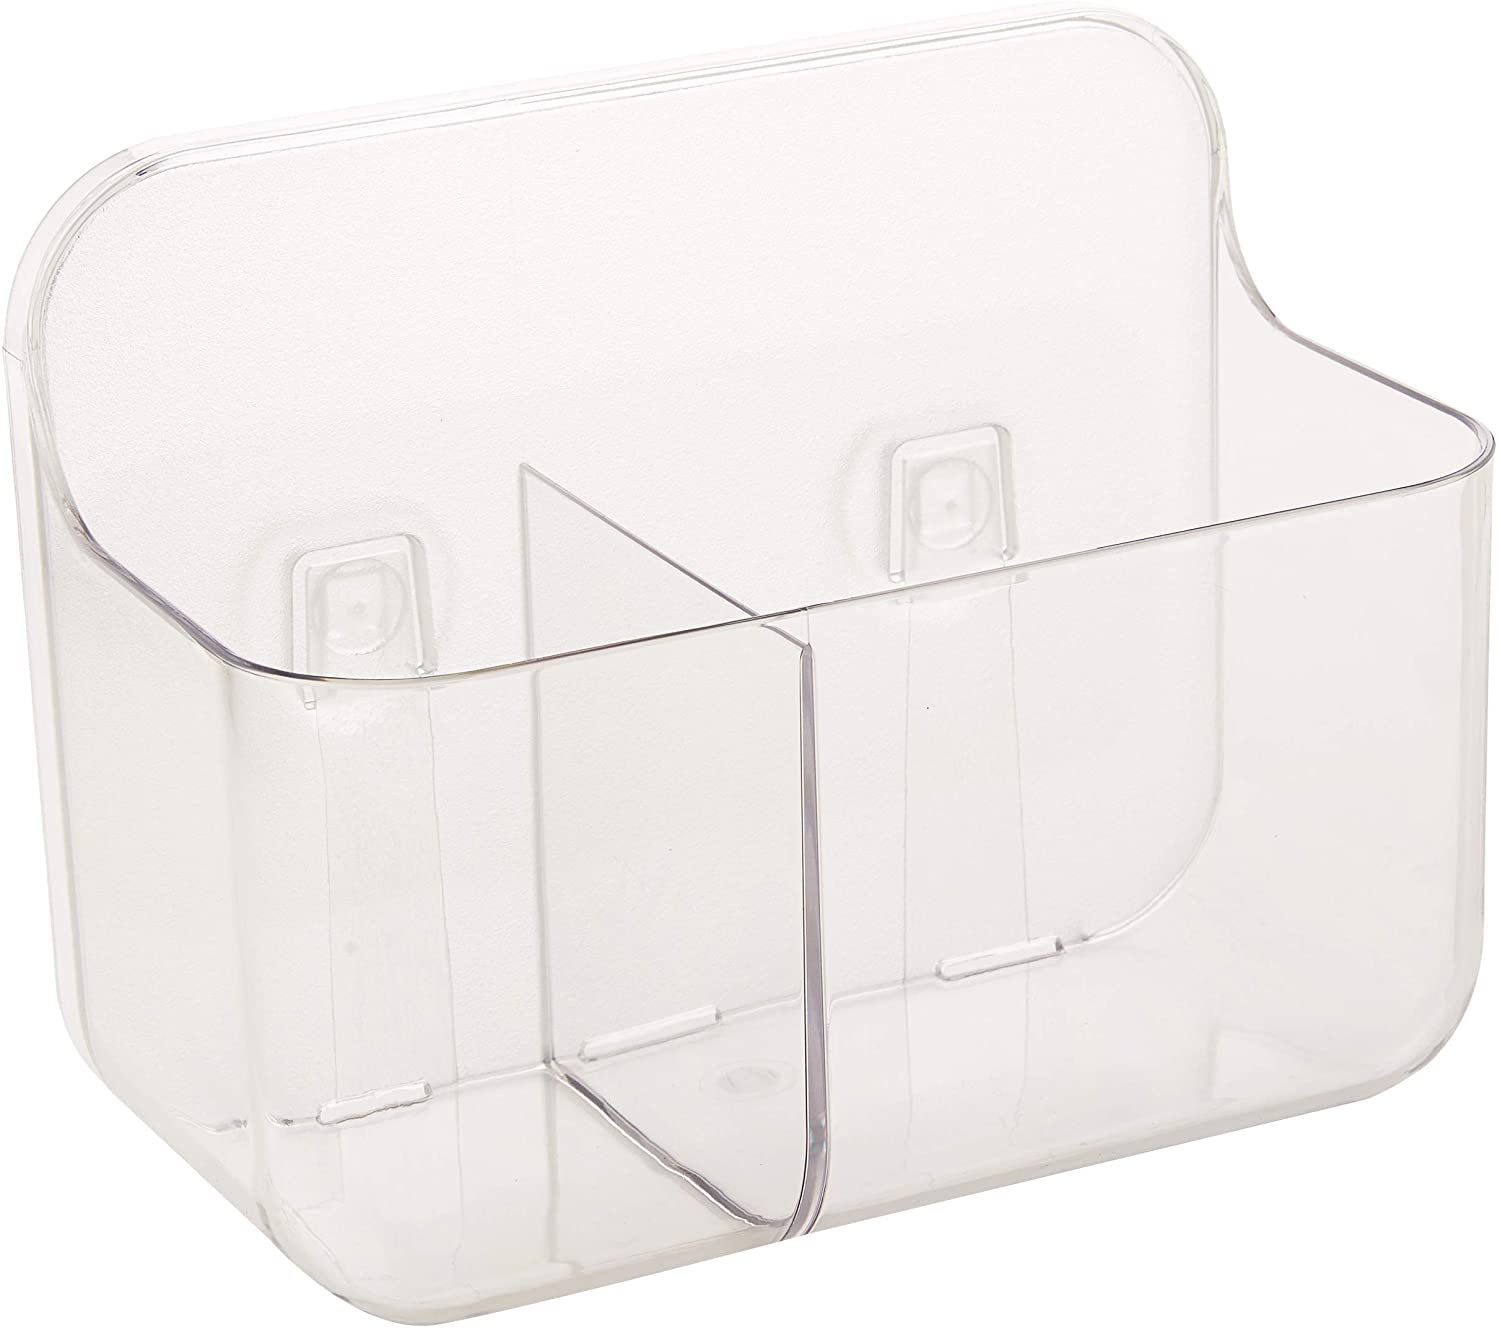 2 COMPARTMENTS ADDIS INVISIFIX BATHROOM TOOTHBRUSH CADDY HOLDER 